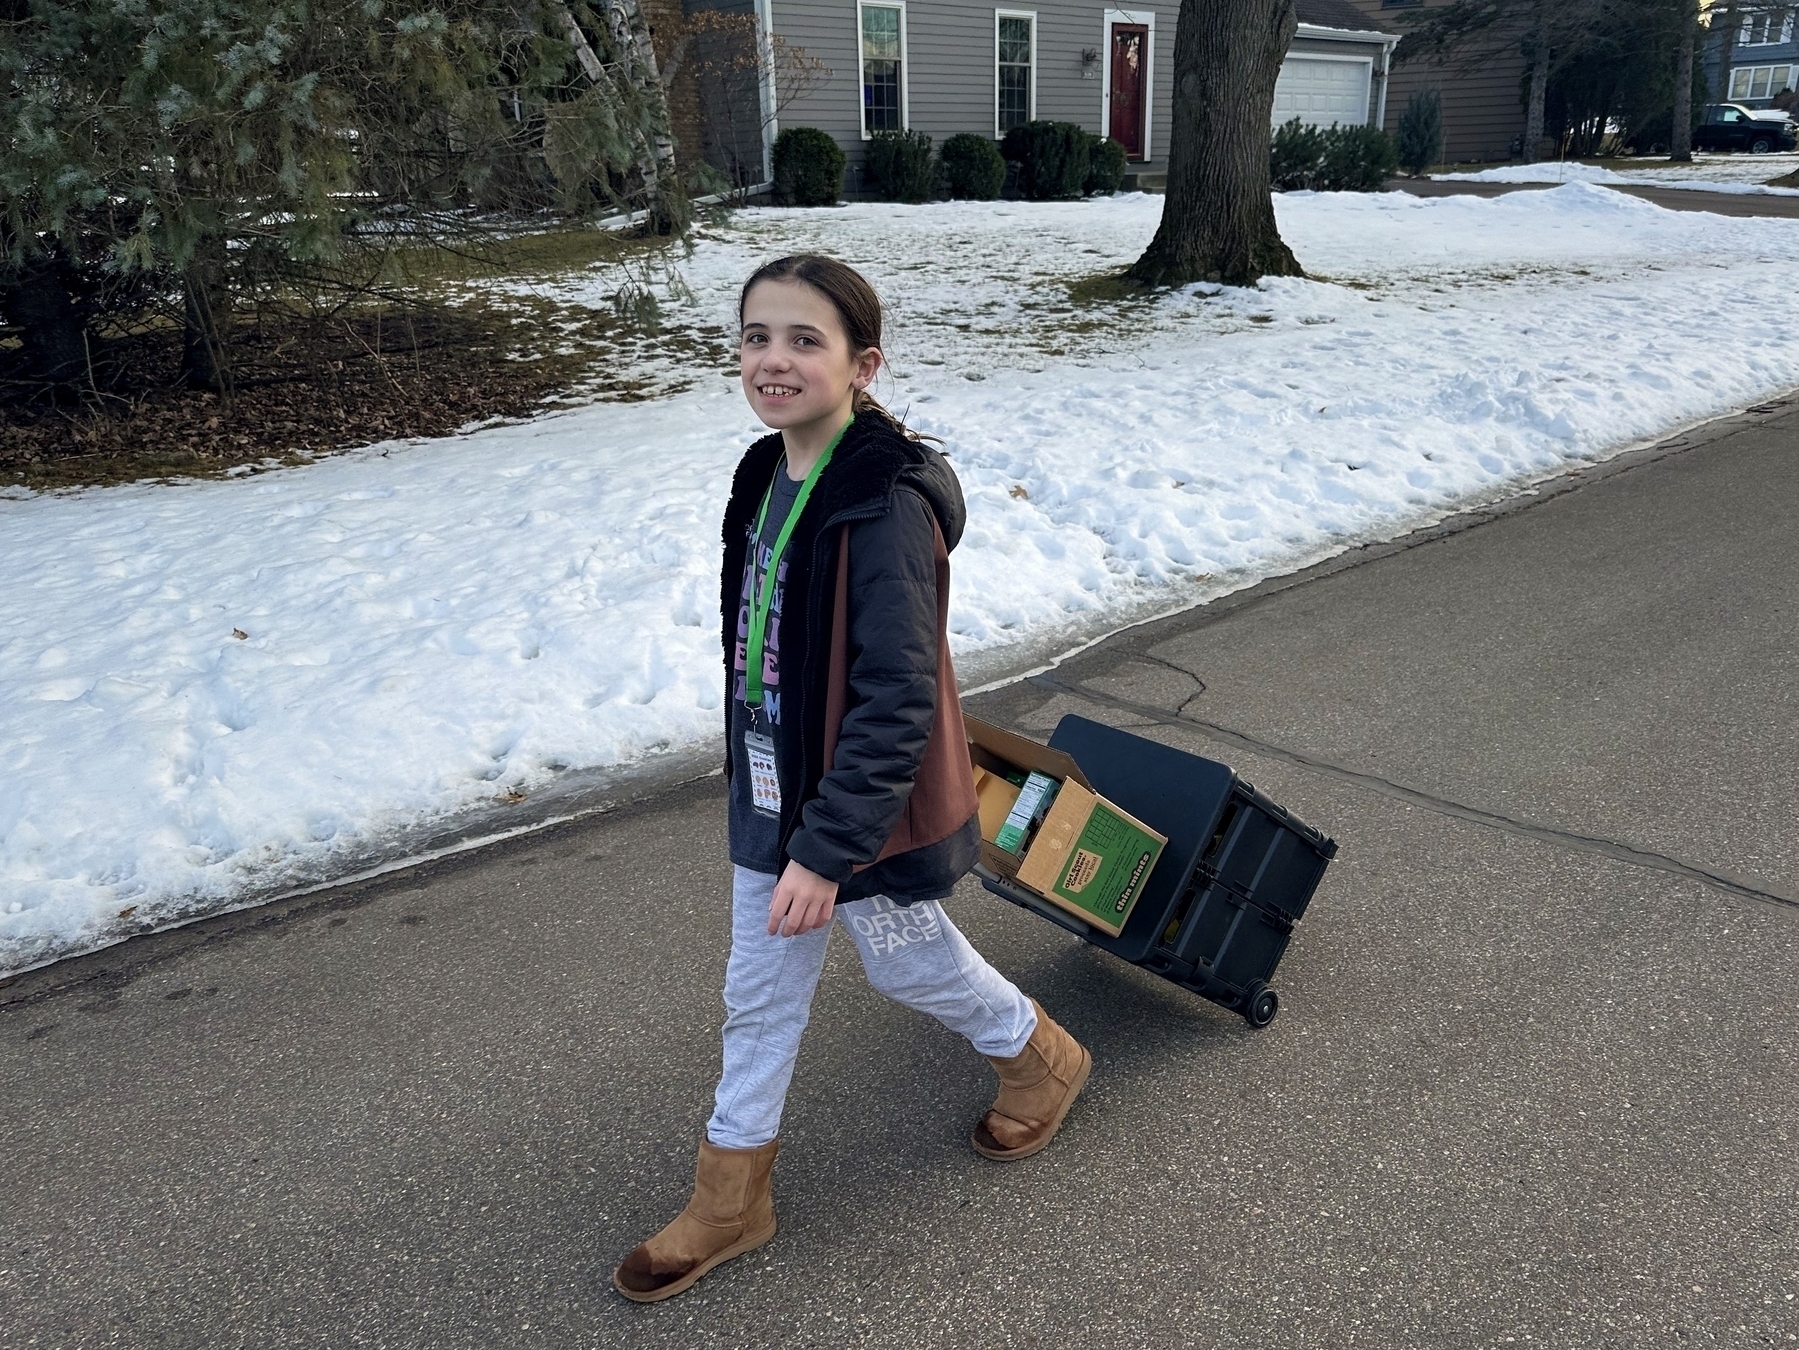 A young girl walks on a street, pulling a box on wheels, in a snowy suburban setting.